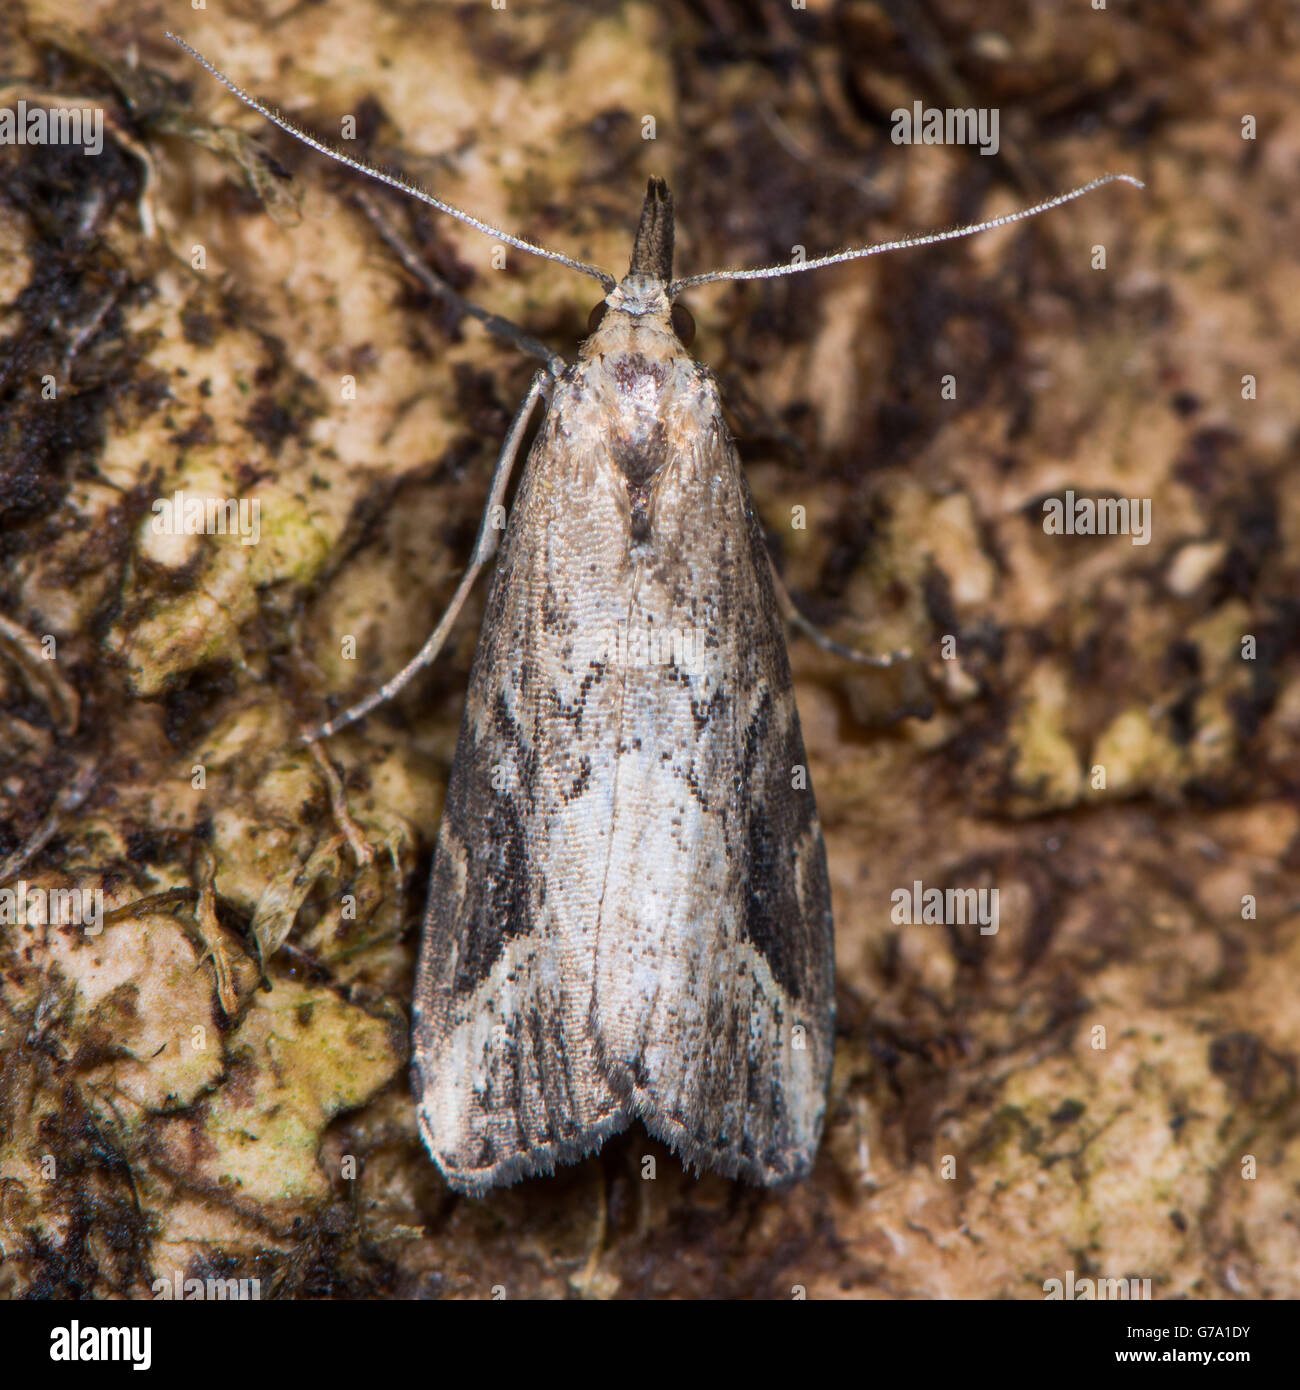 Pinion-streaked snout moth (Schrankia costaestrigalis) from above. British insect in the family Erebidae. Stock Photo